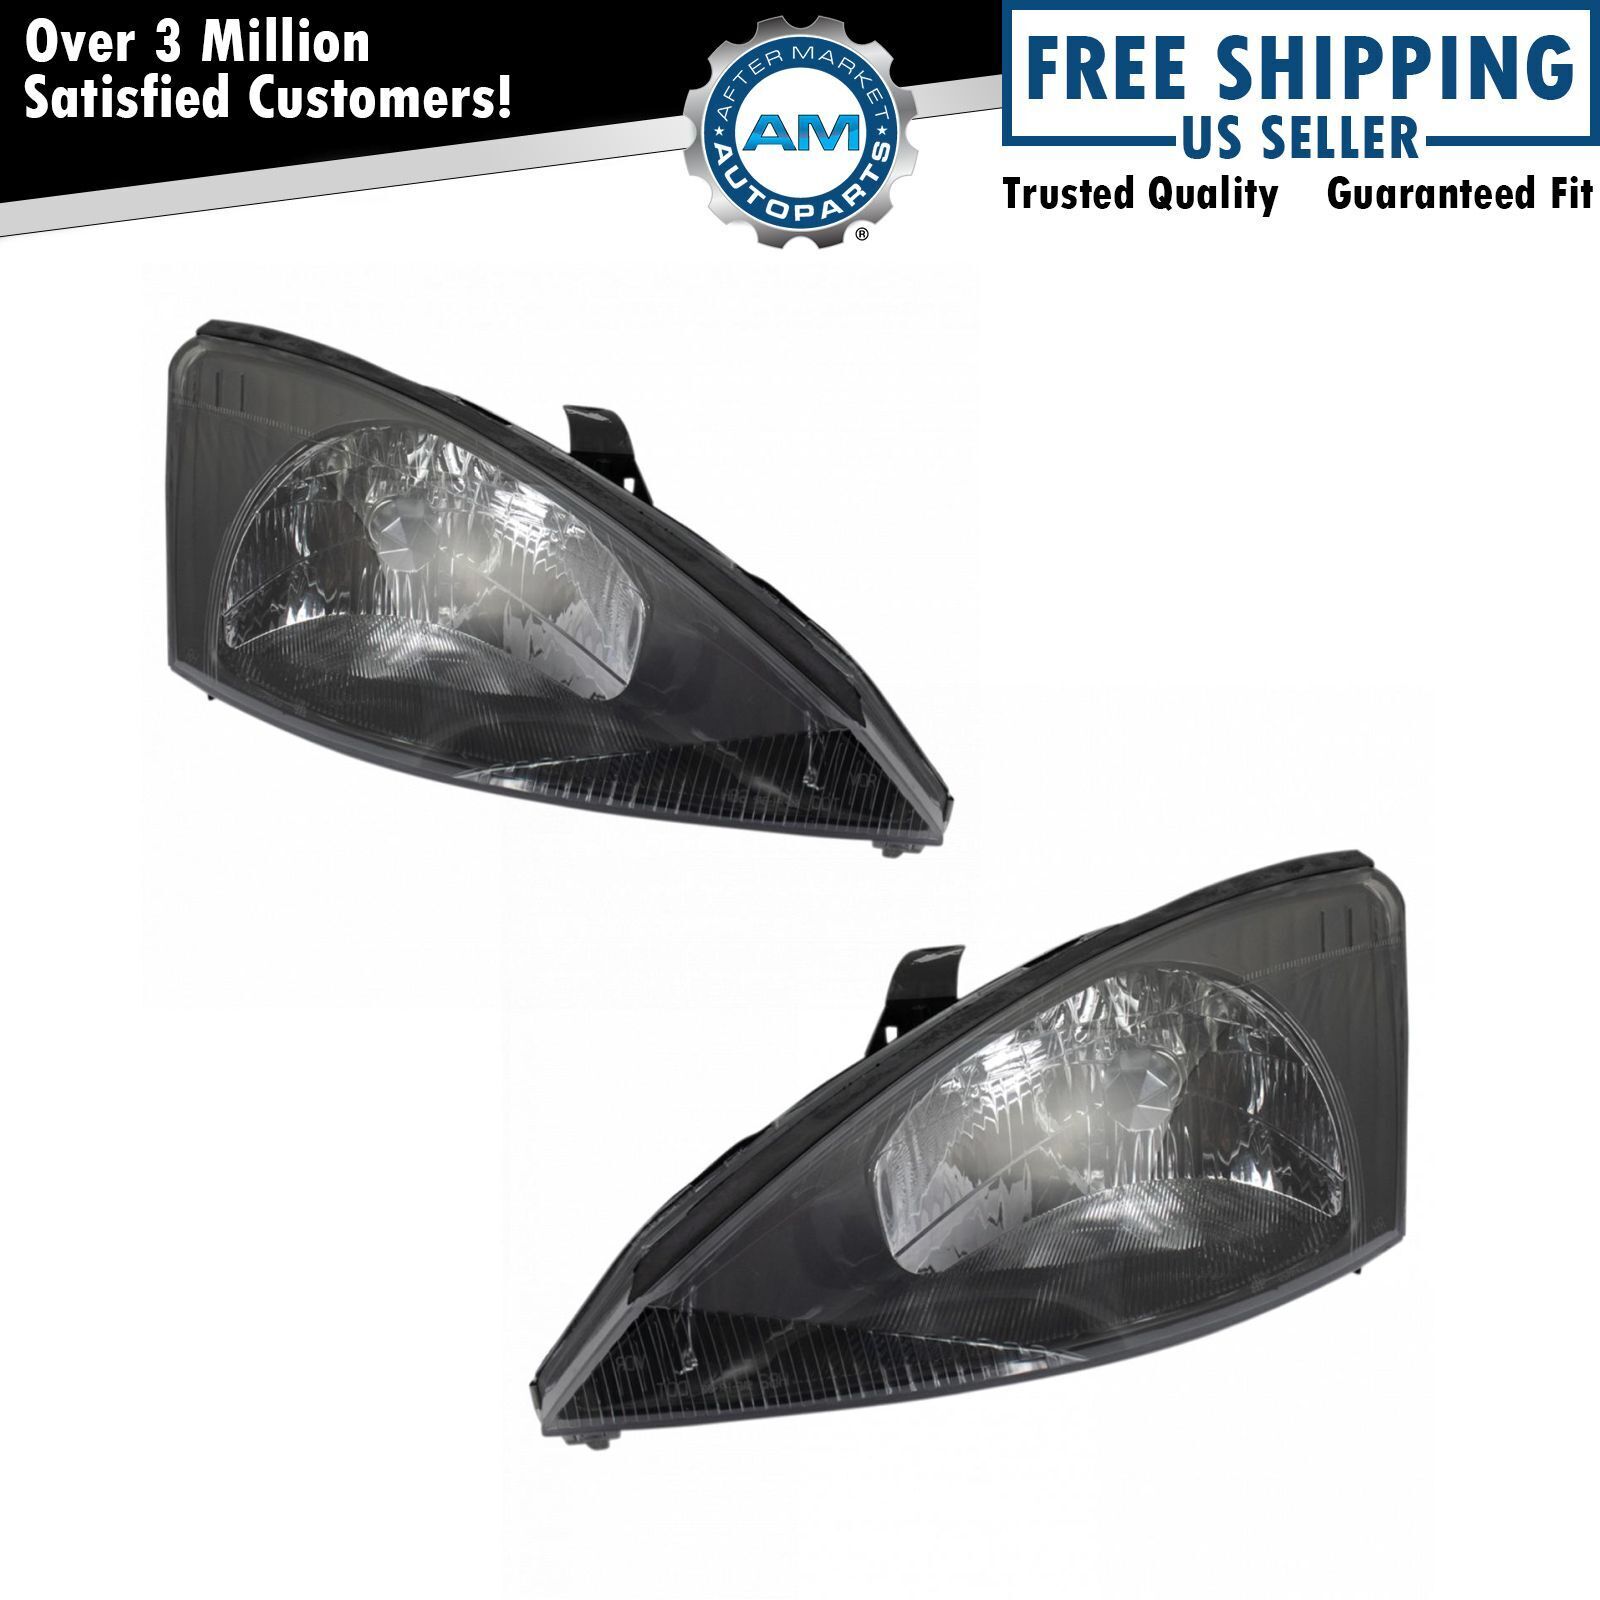 Headlight Set Left & Right Halogen For 2003-2004 Ford Focus FO2502199 FO2503199